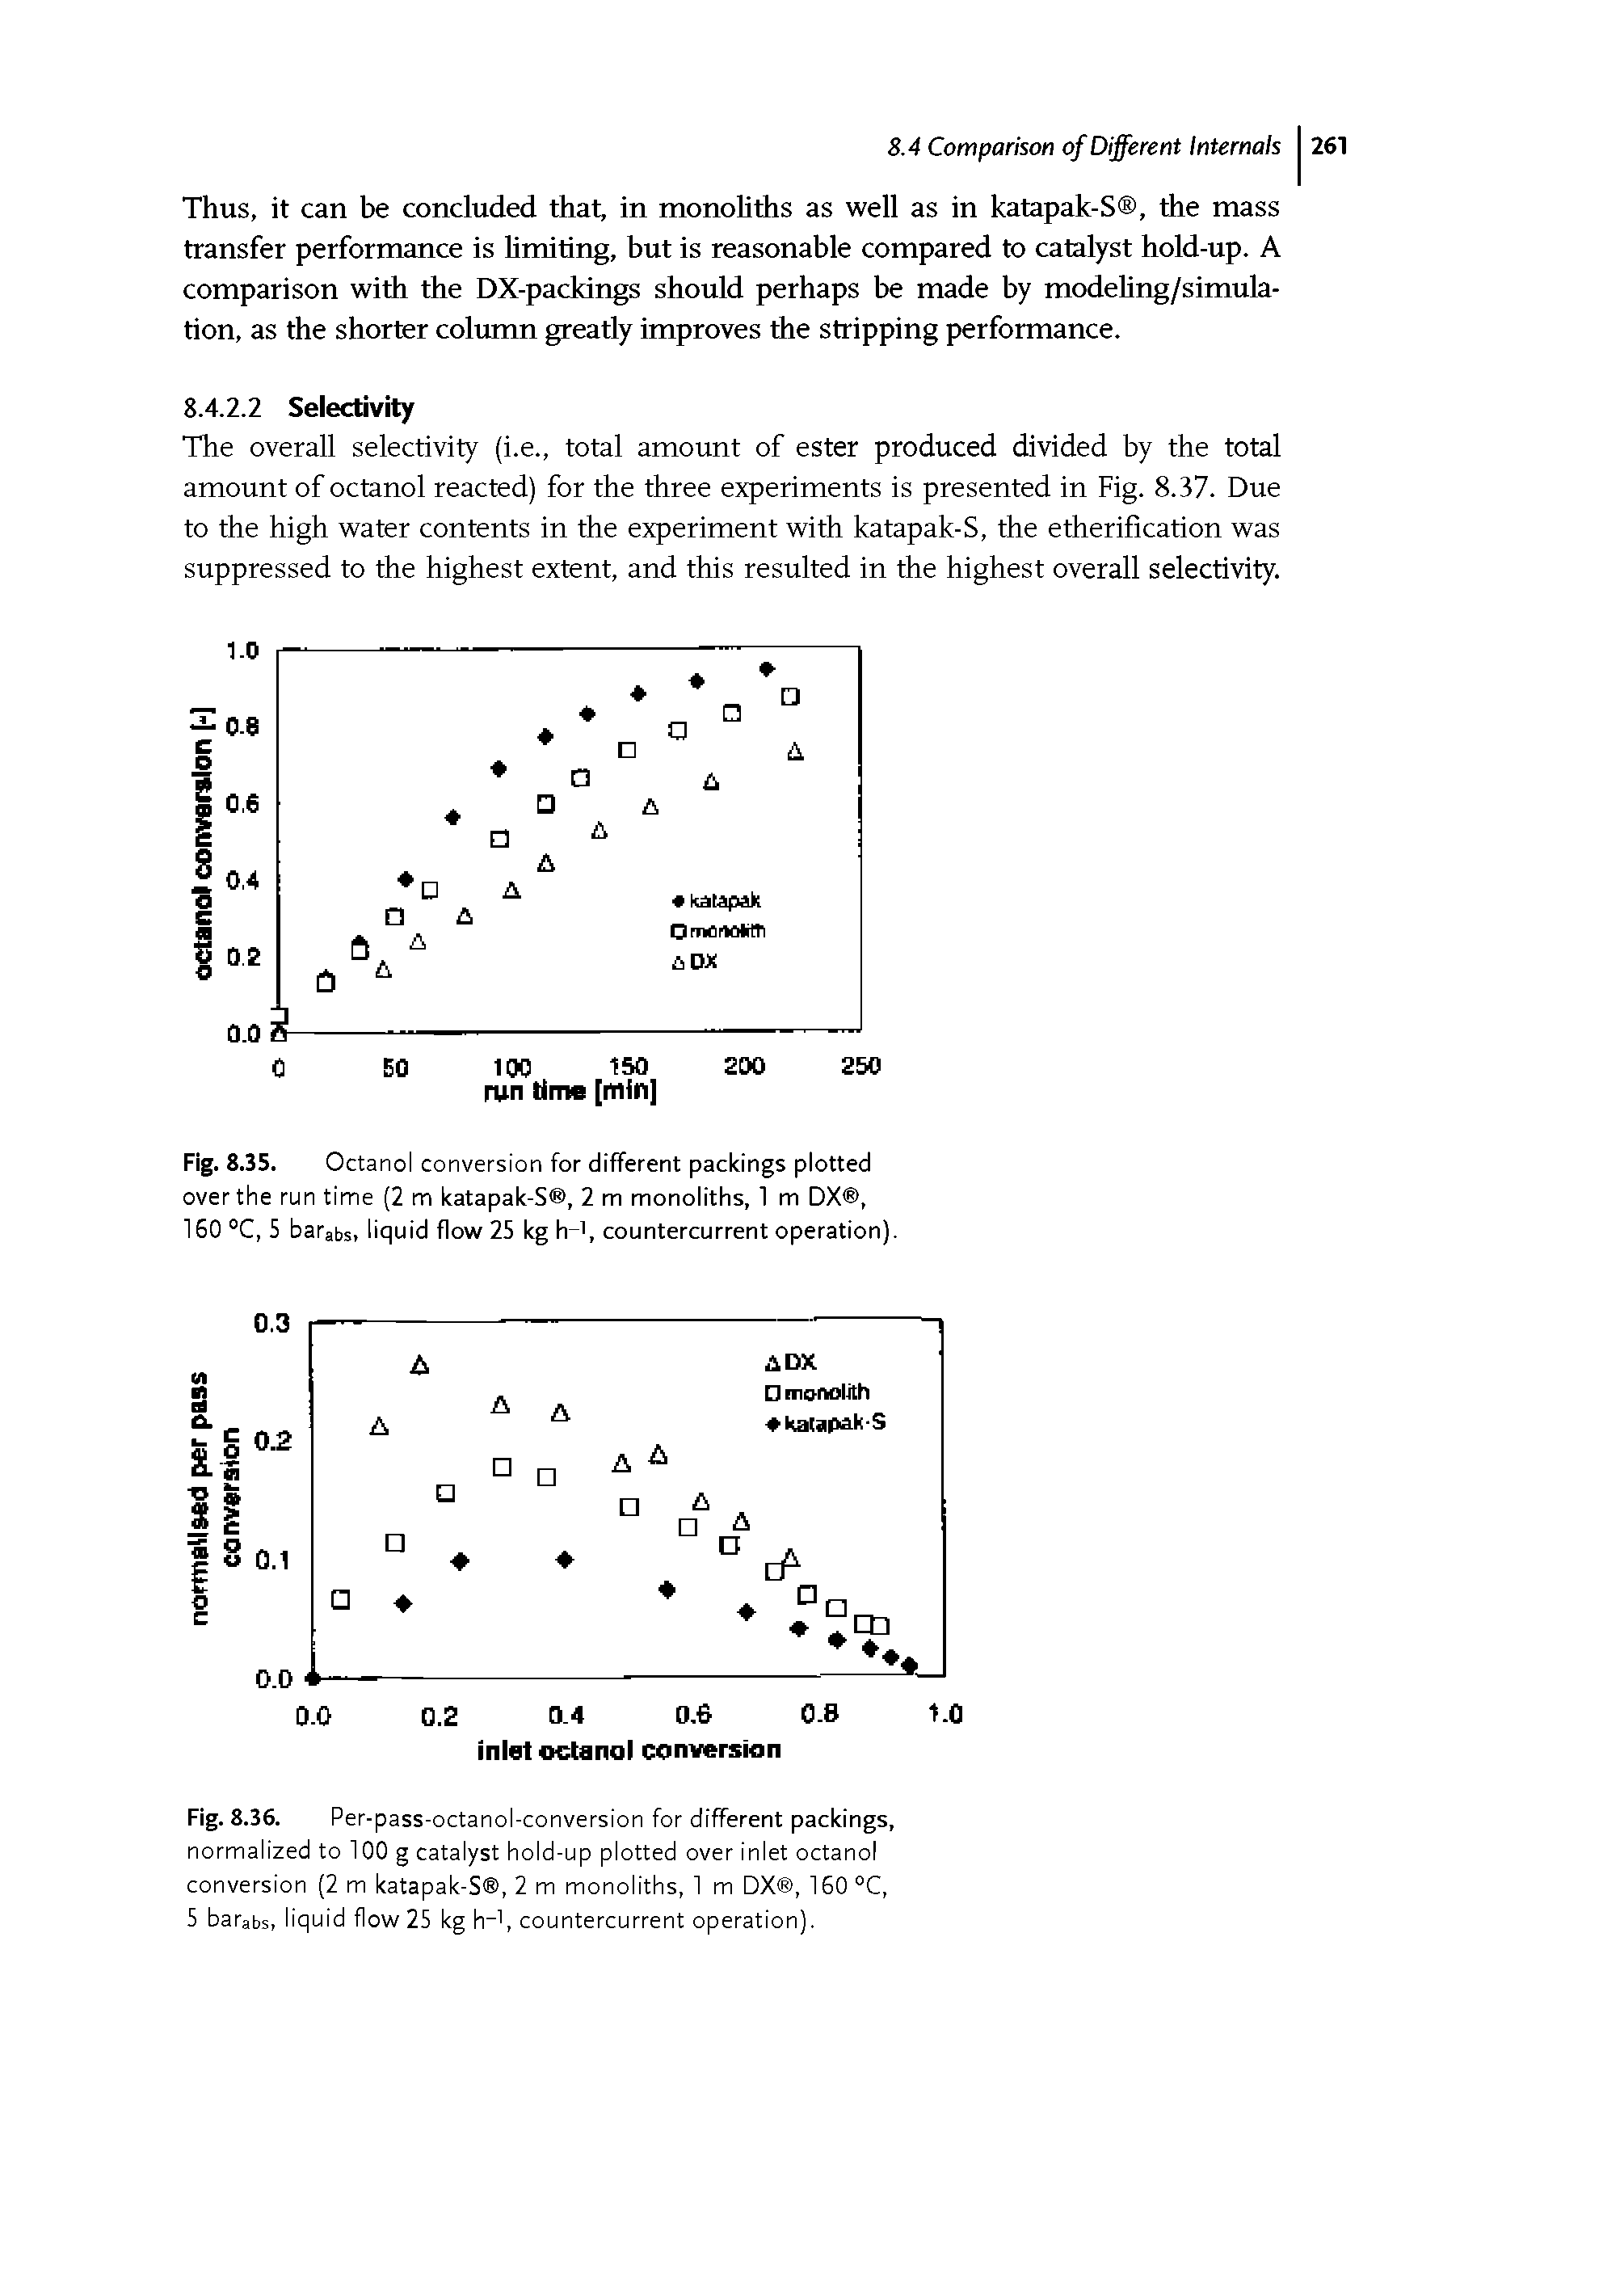 Fig. 8.36. Per-pass-octanol-conversion for different packings, normalized to 100 g catalyst hold-up plotted over inlet octanol conversion (2 m katapak-S , 2 m monoliths, 1 m DX , 160 °C, 5 barabs, liquid flow 25 kg h-1, countercurrent operation).